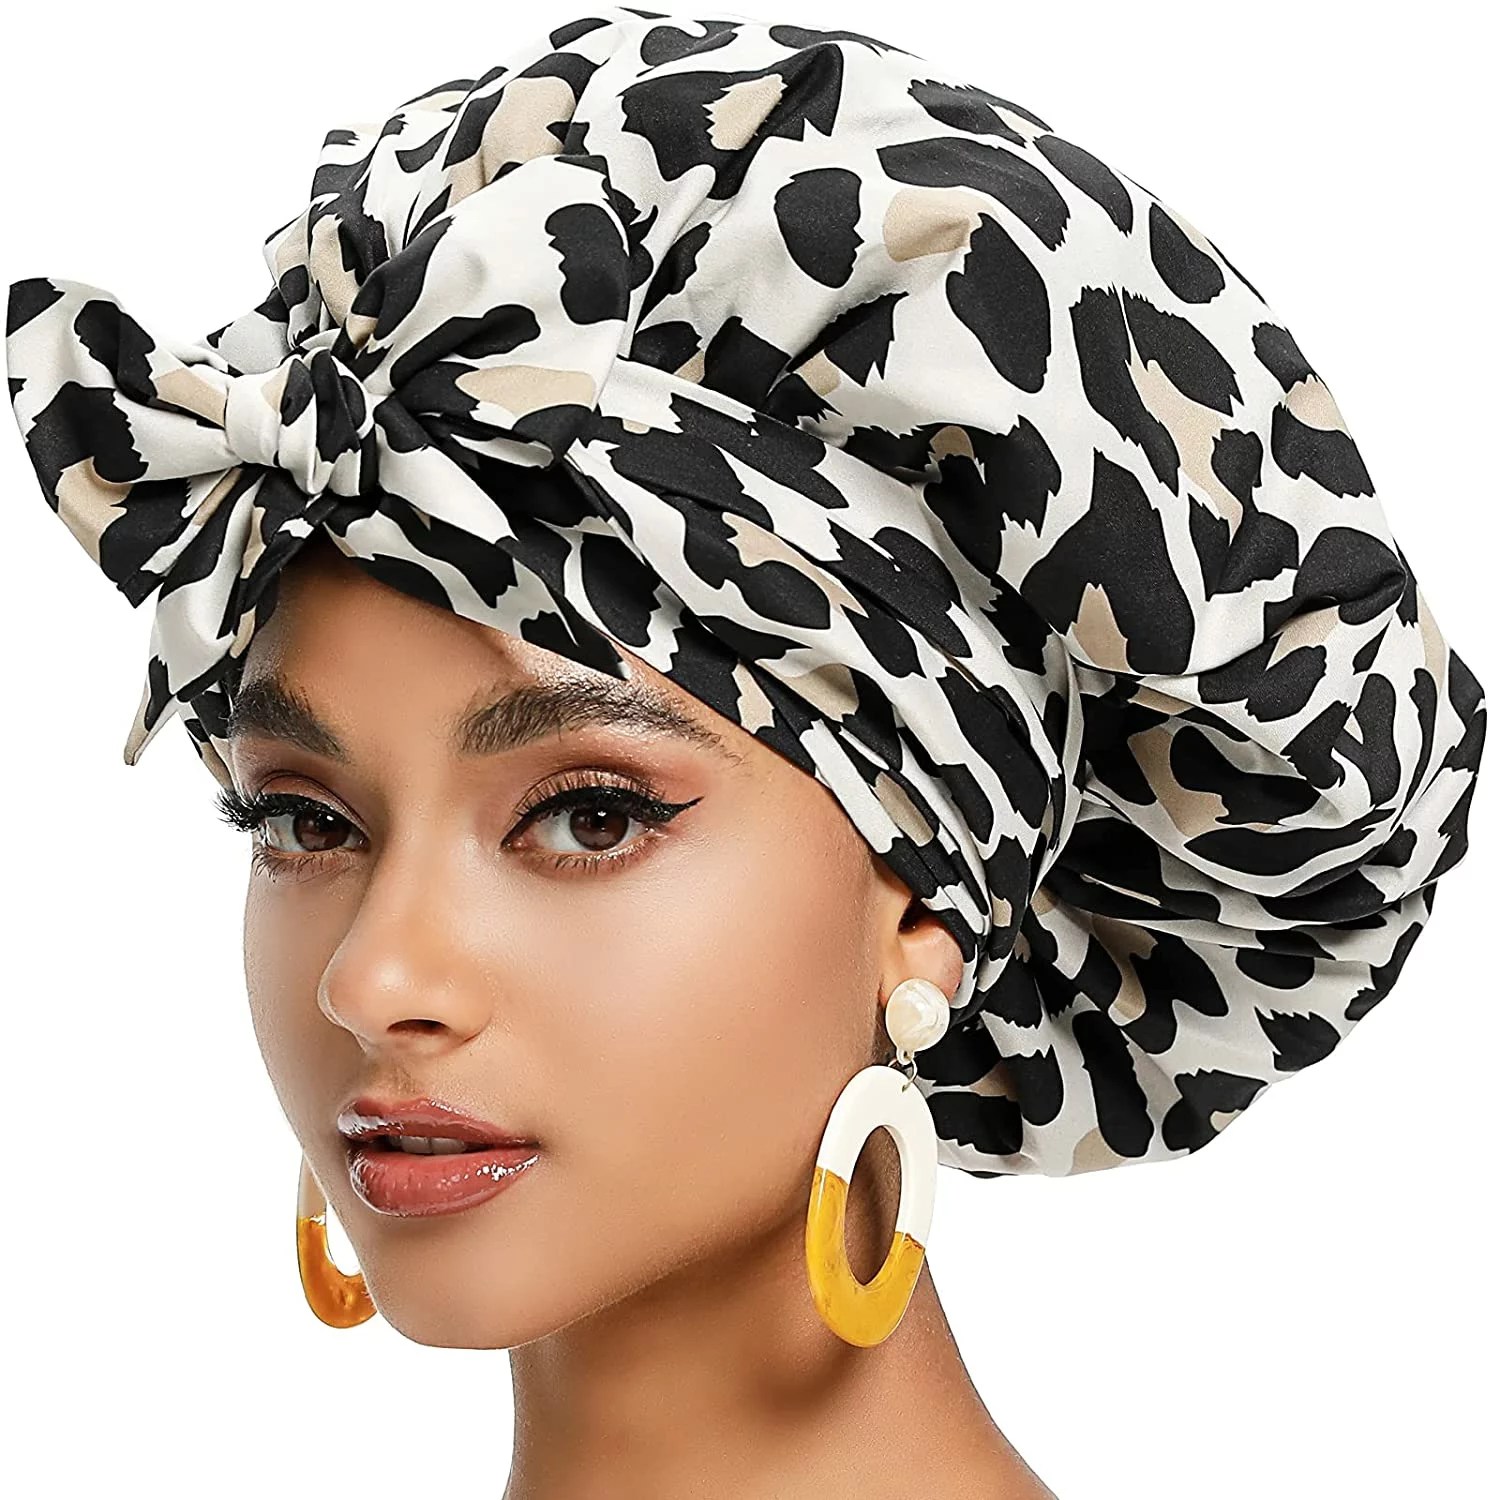 13 Best Bonnets To Protect Hair While Sleeping